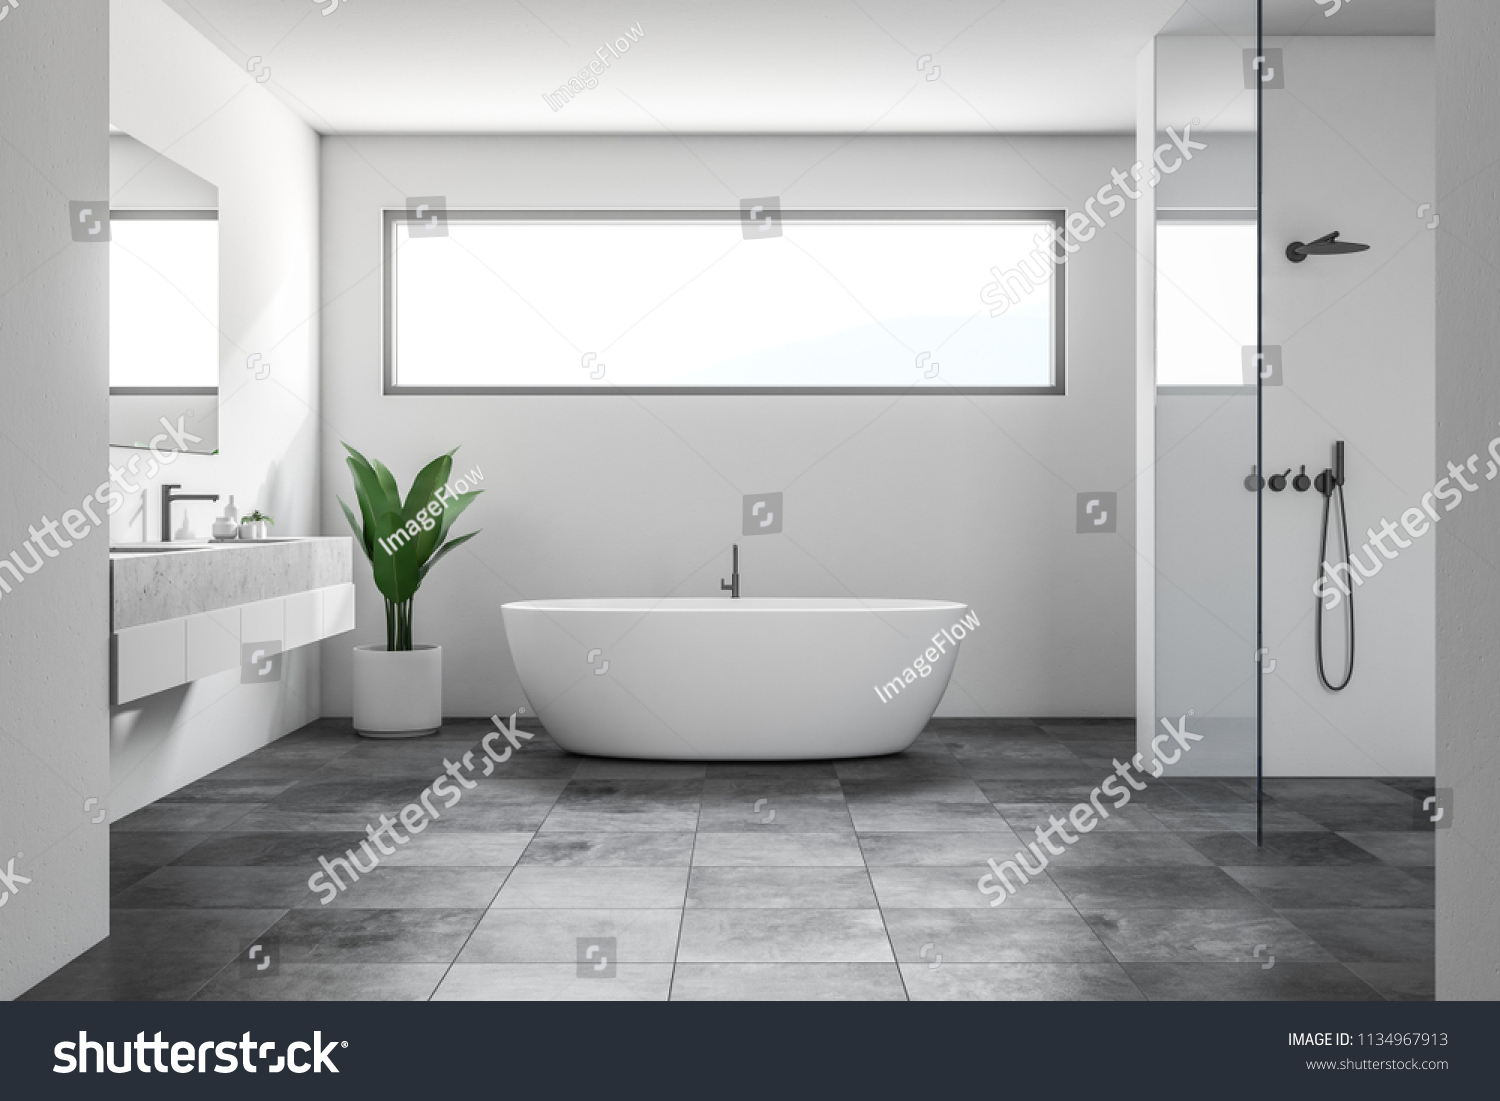 688,608 House of tiles Images, Stock Photos & Vectors | Shutterstock